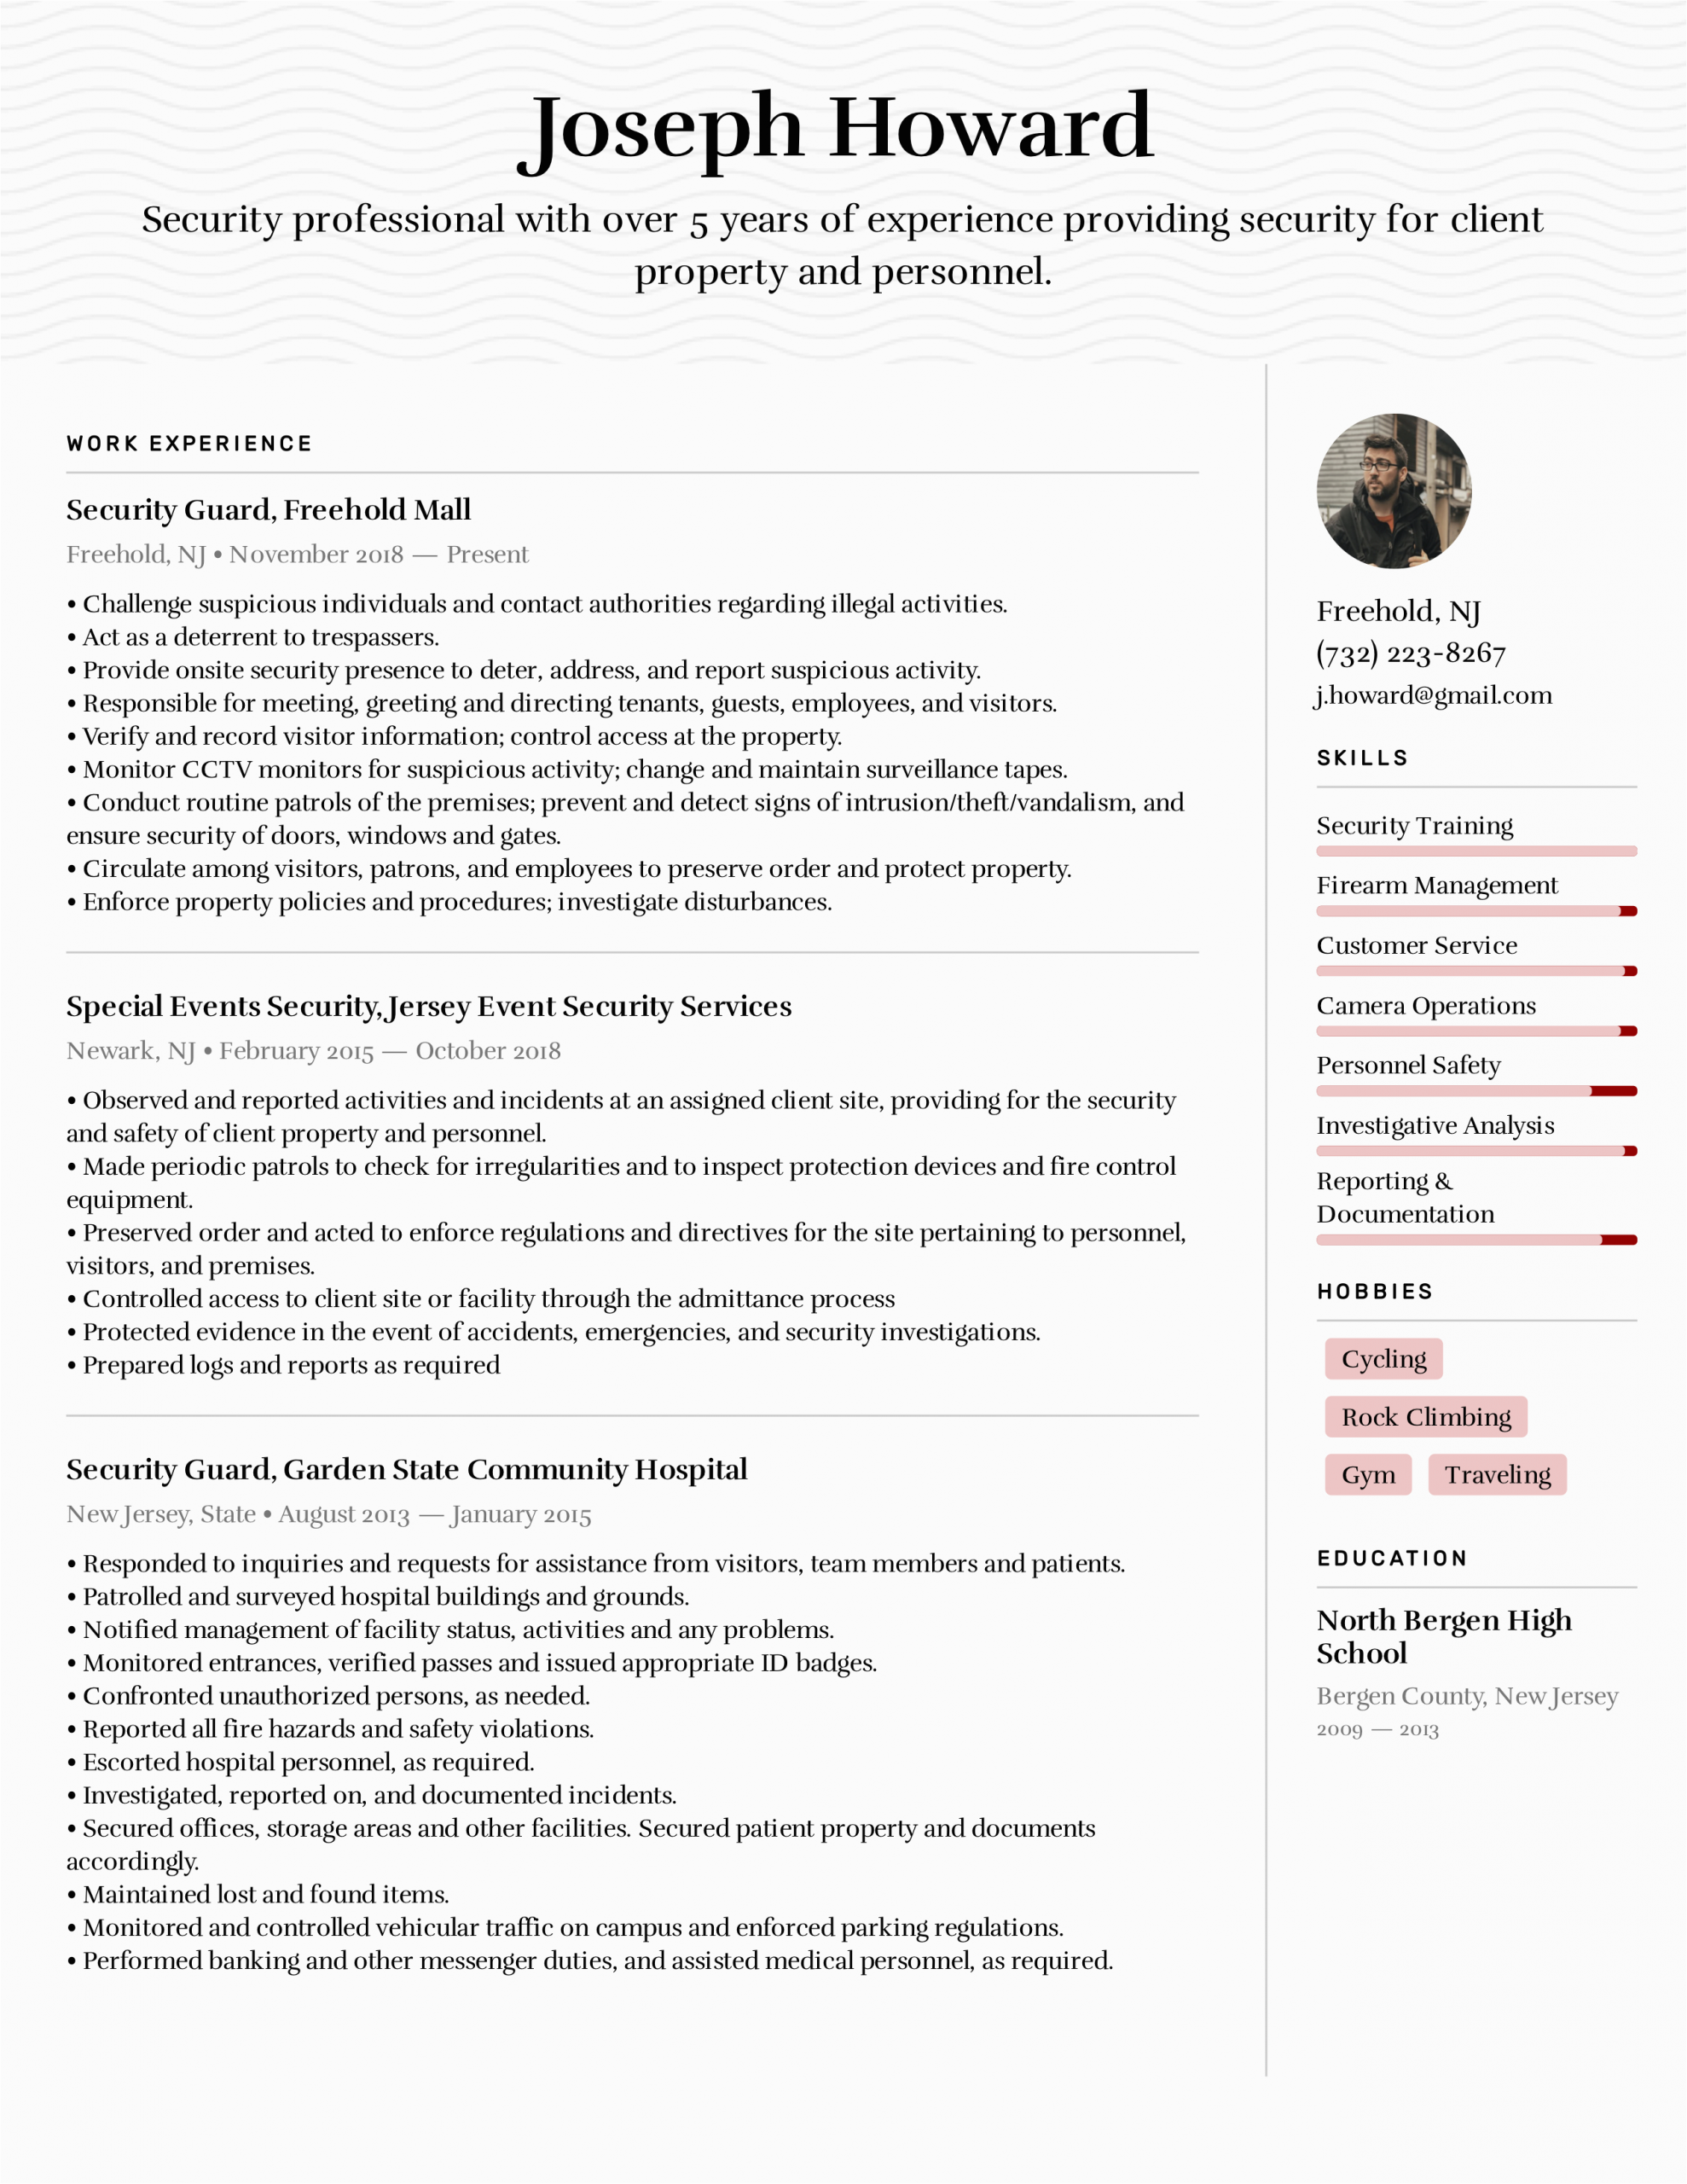 Security Guard Resume Template for Free Security Guard Resume Objective Free 11 Sample Security